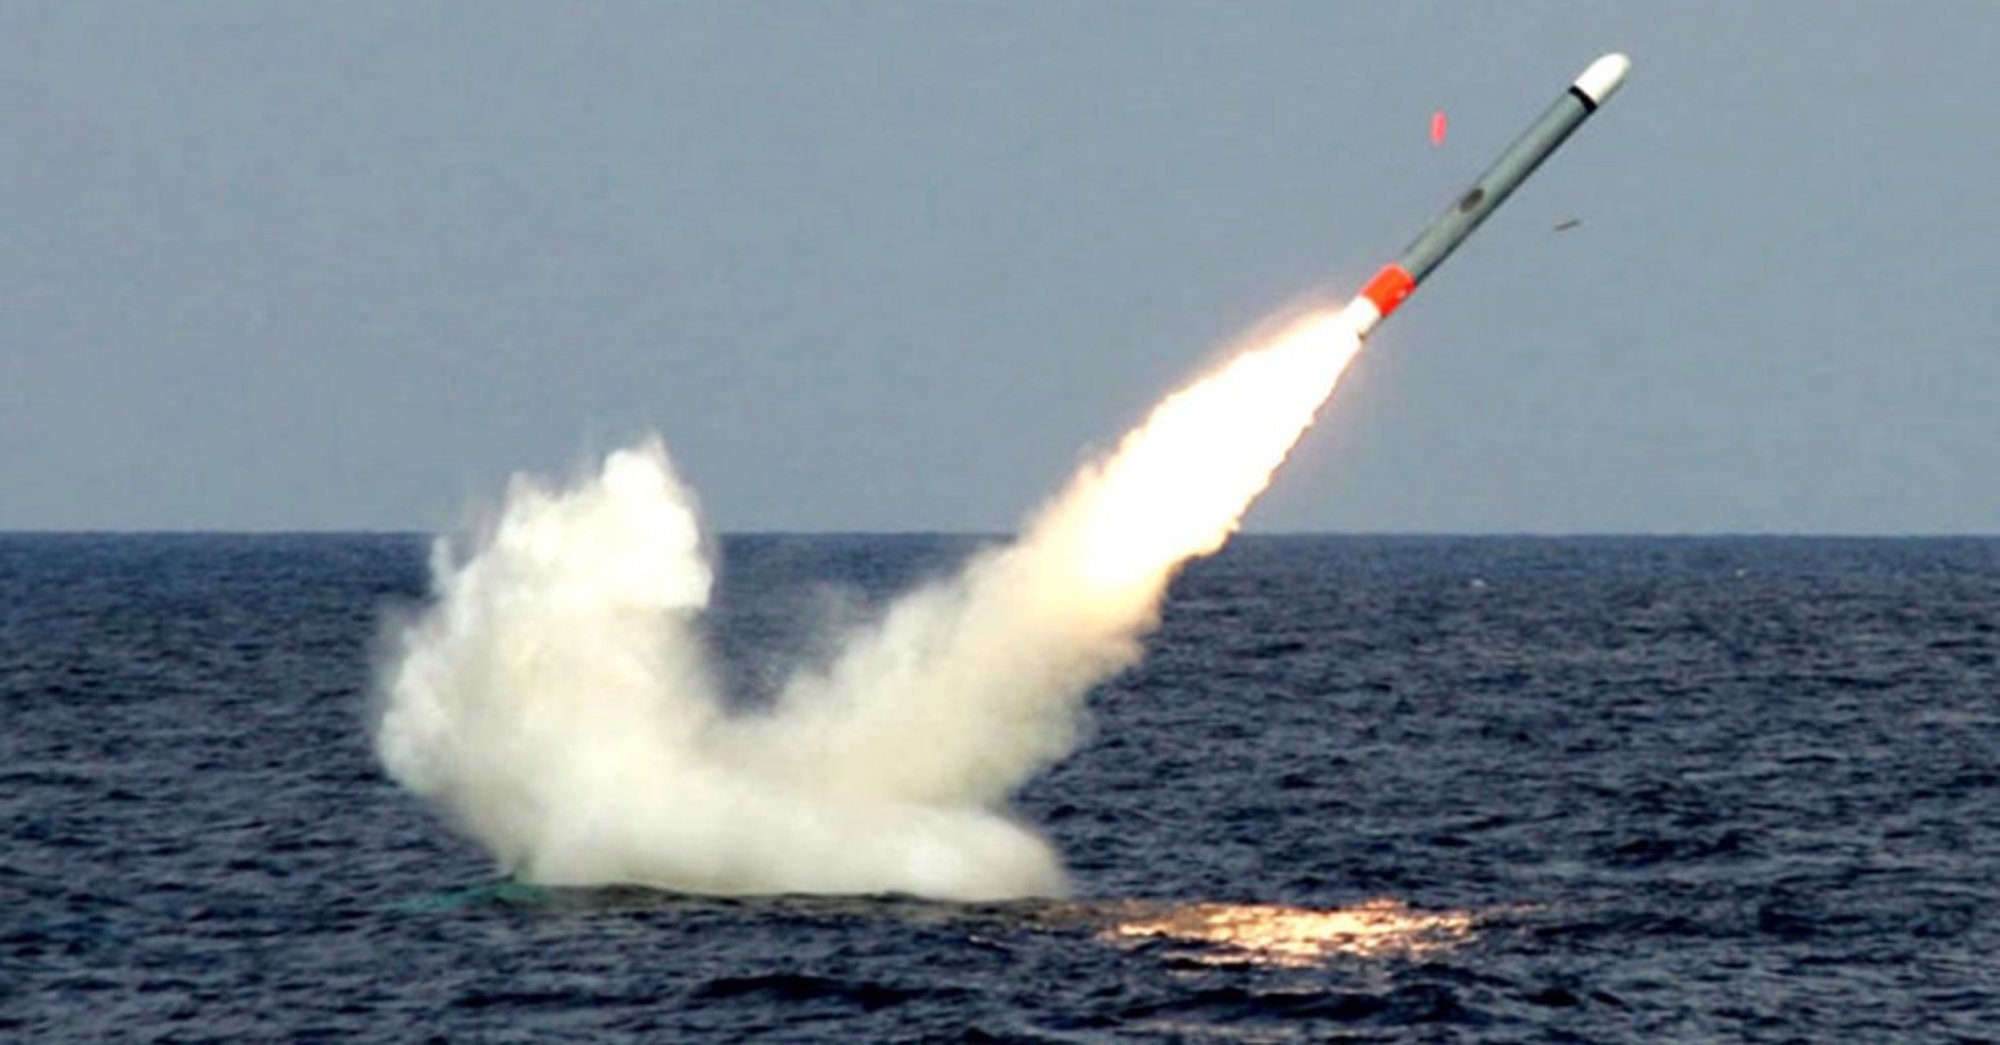 Japan is determined to purchase Tomahawk missiles for defense against the DPRK before it gets hypersonic weapons and modernizes the Type 12 missile